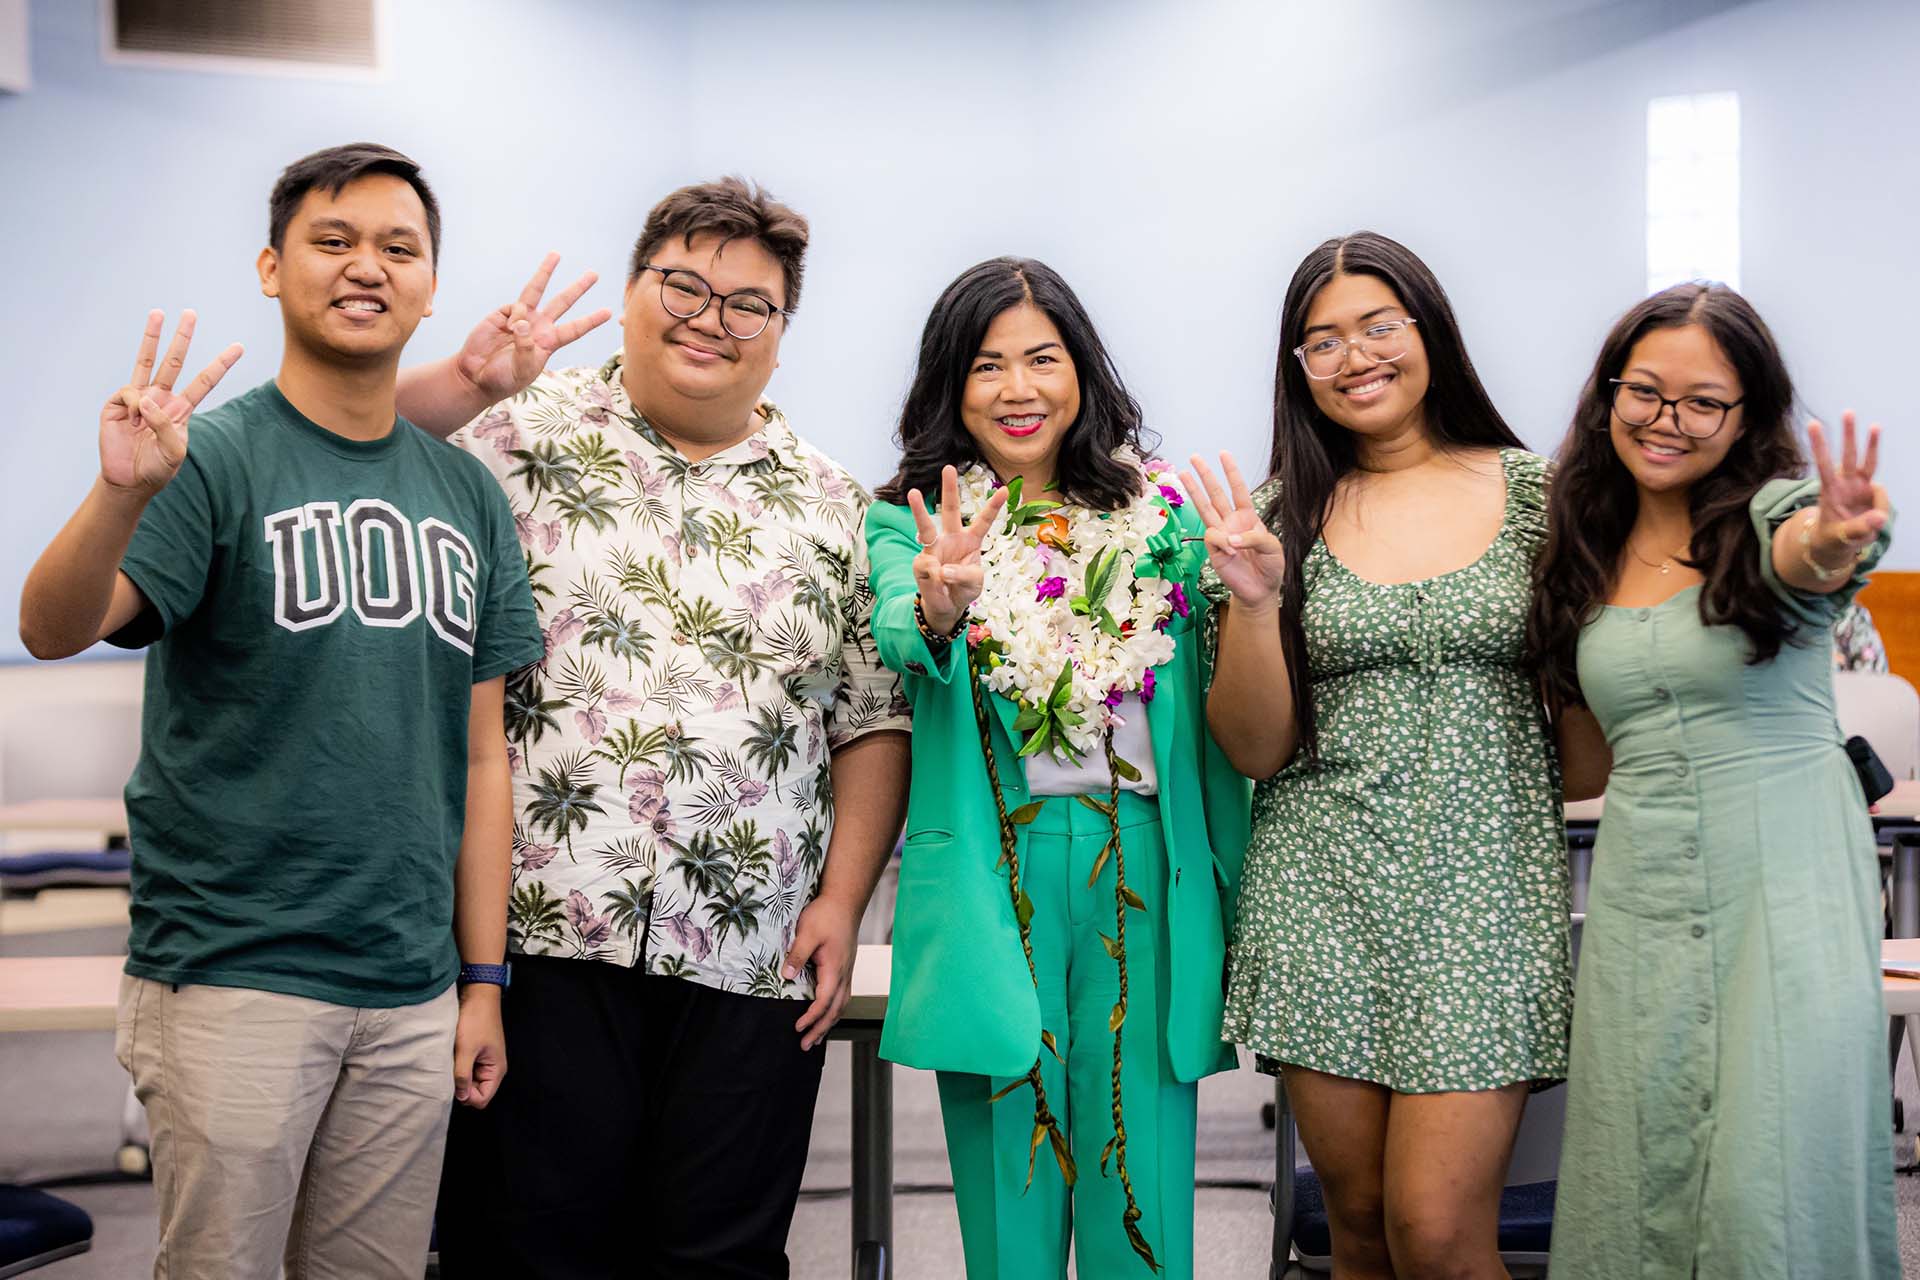 Dr. Anita Borja Enriquez, center, and members of the UOG Student Government Association show the Triton sign following the selection of Dr. Enriquez as the next UOG president.